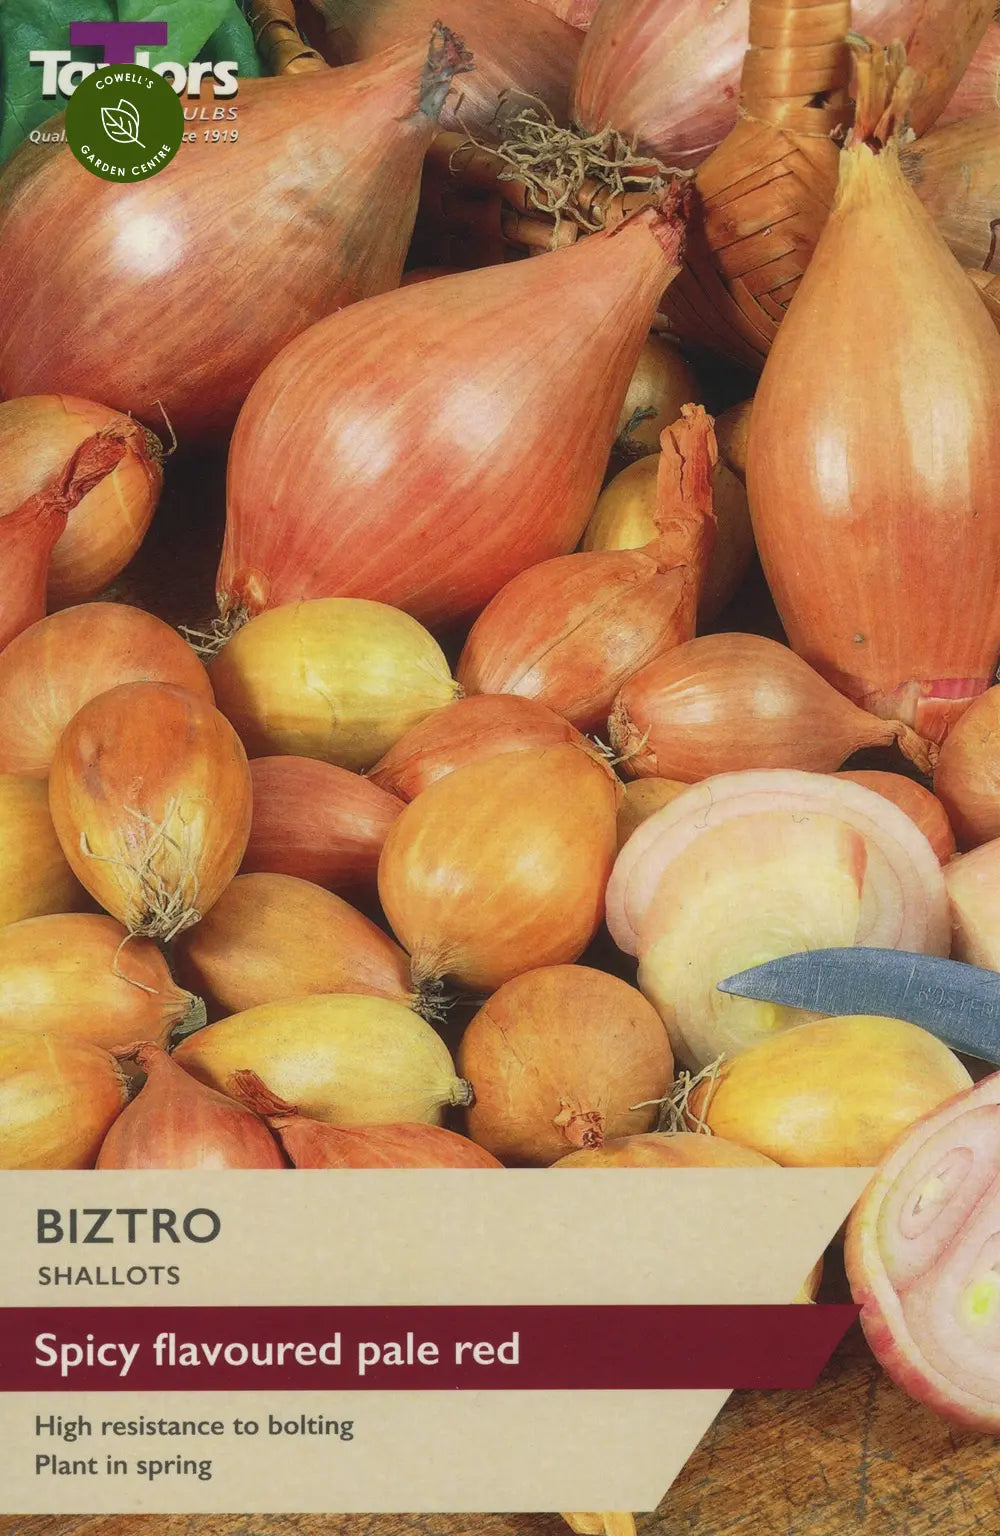 PRE-PACKED BIZTRO SHALLOTS 12